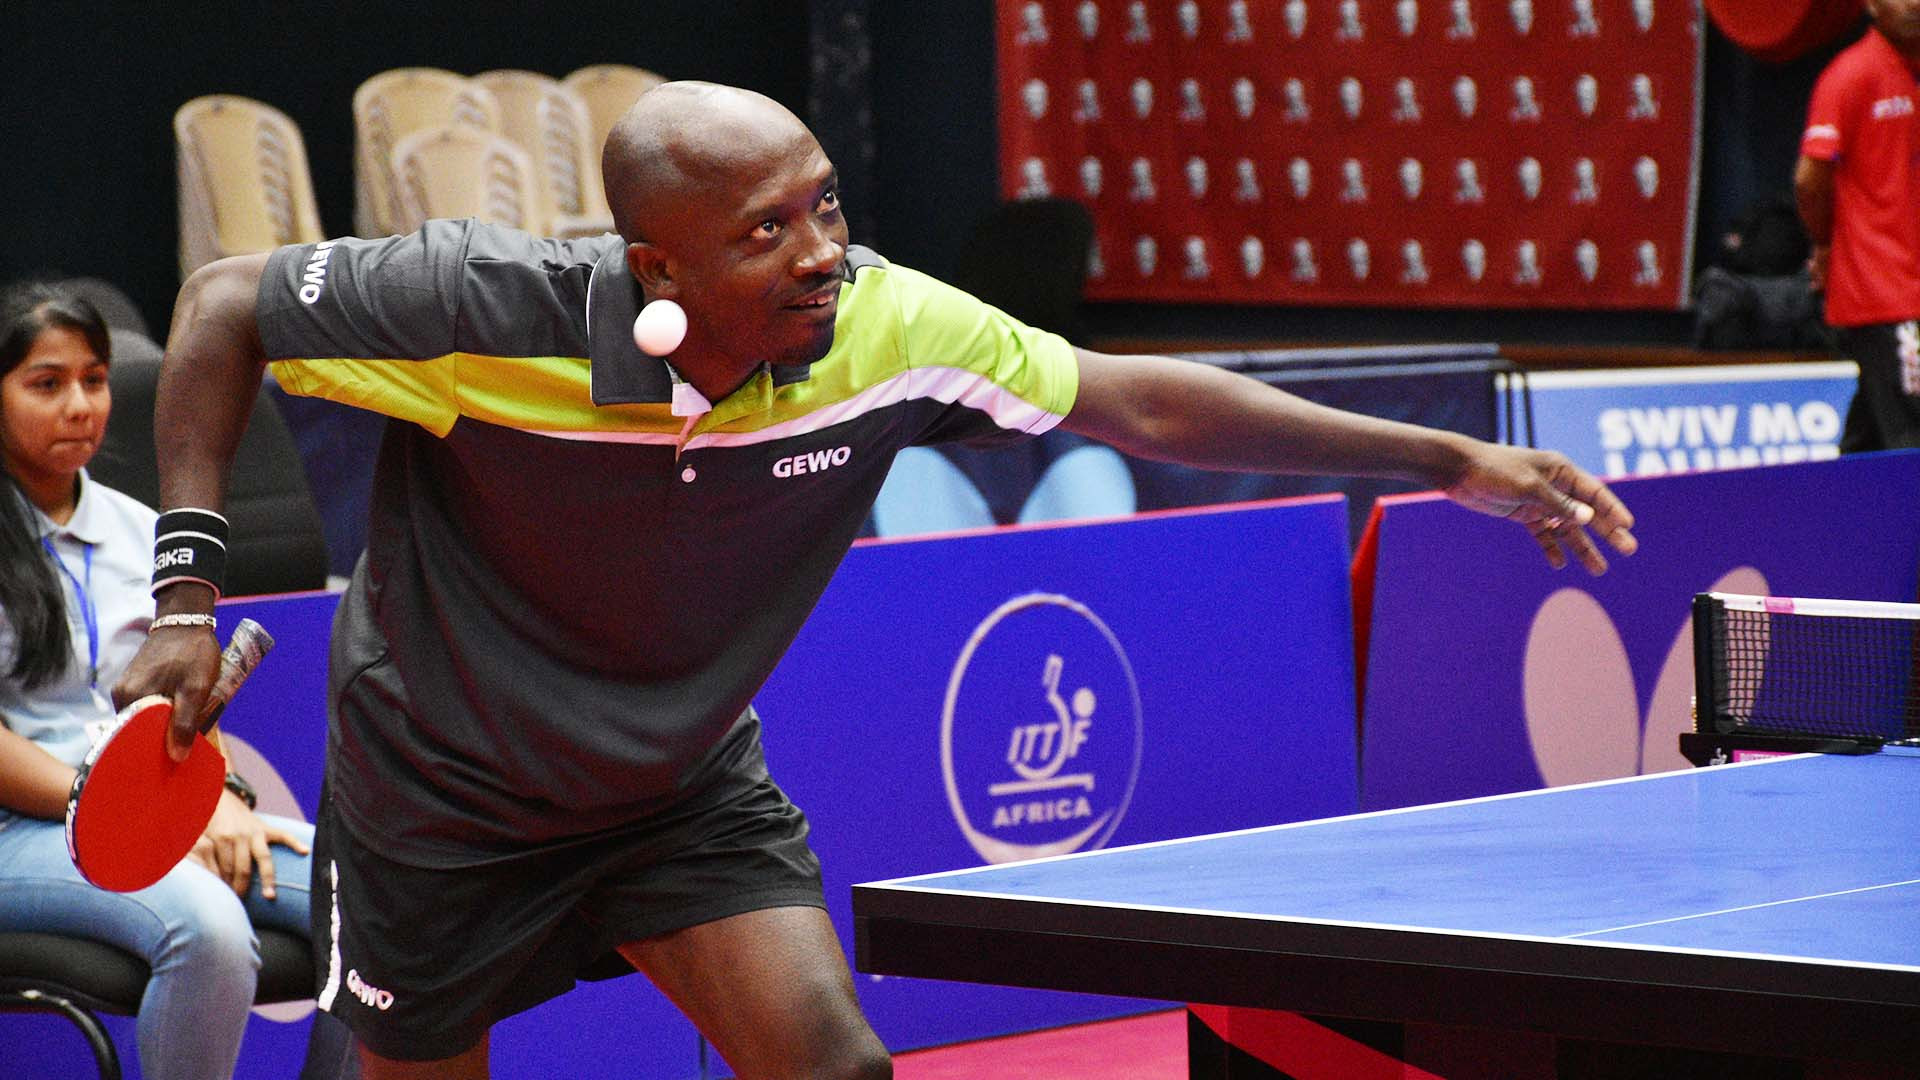 Action has begun at the tournament in Mauritius ©ITTF